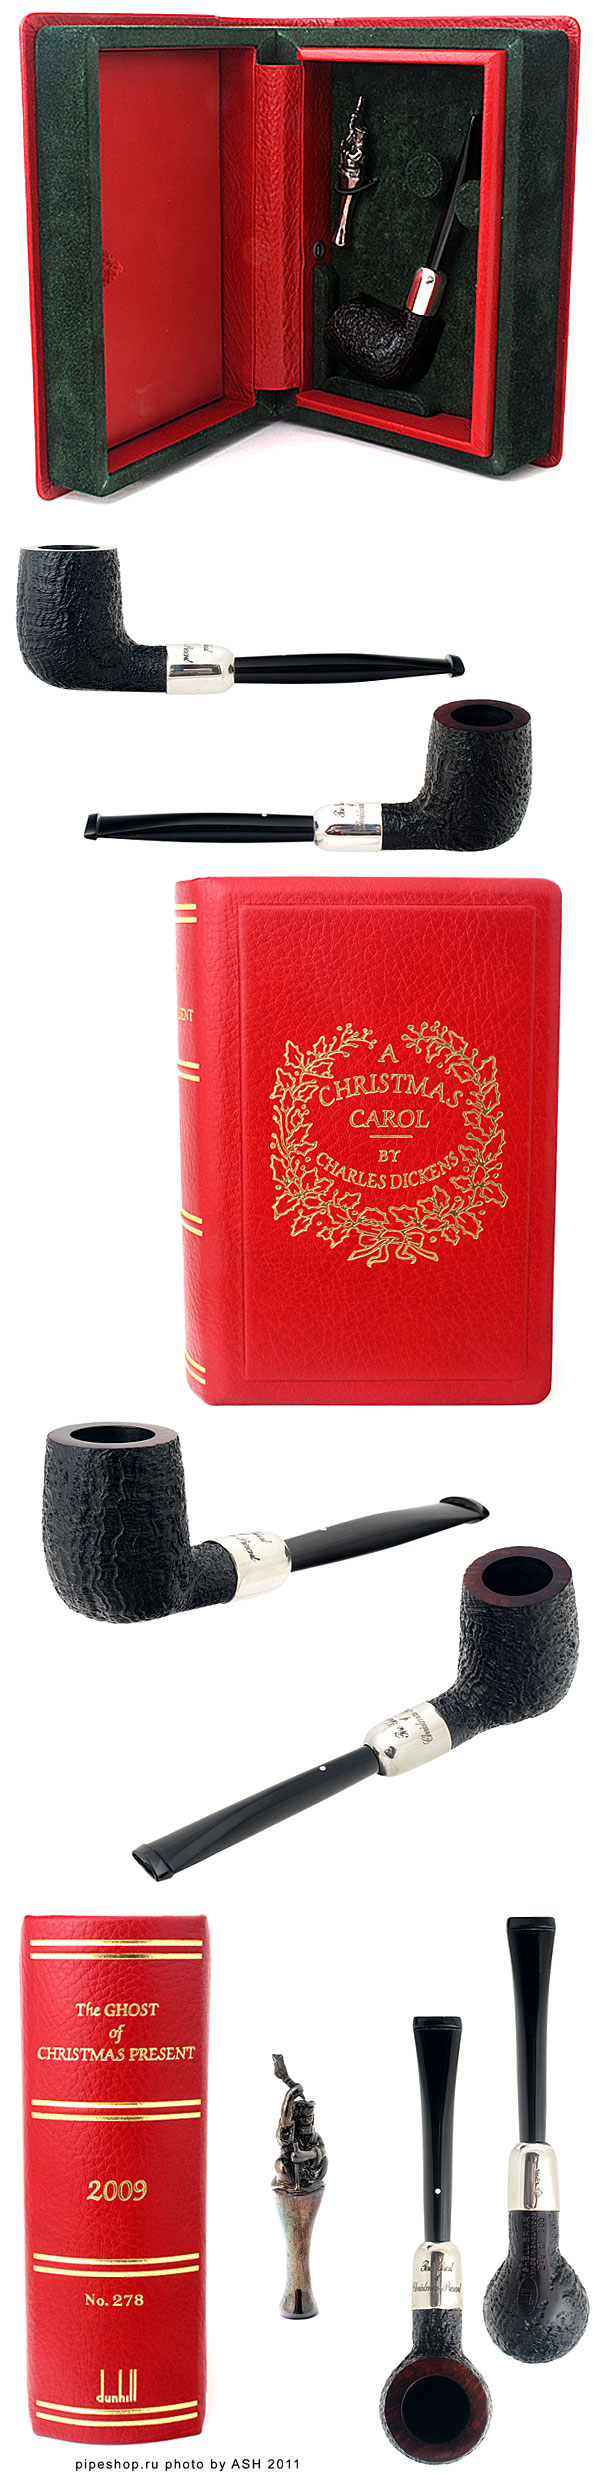   DUNHILL CHRISTMAS PIPE 2009 278/300